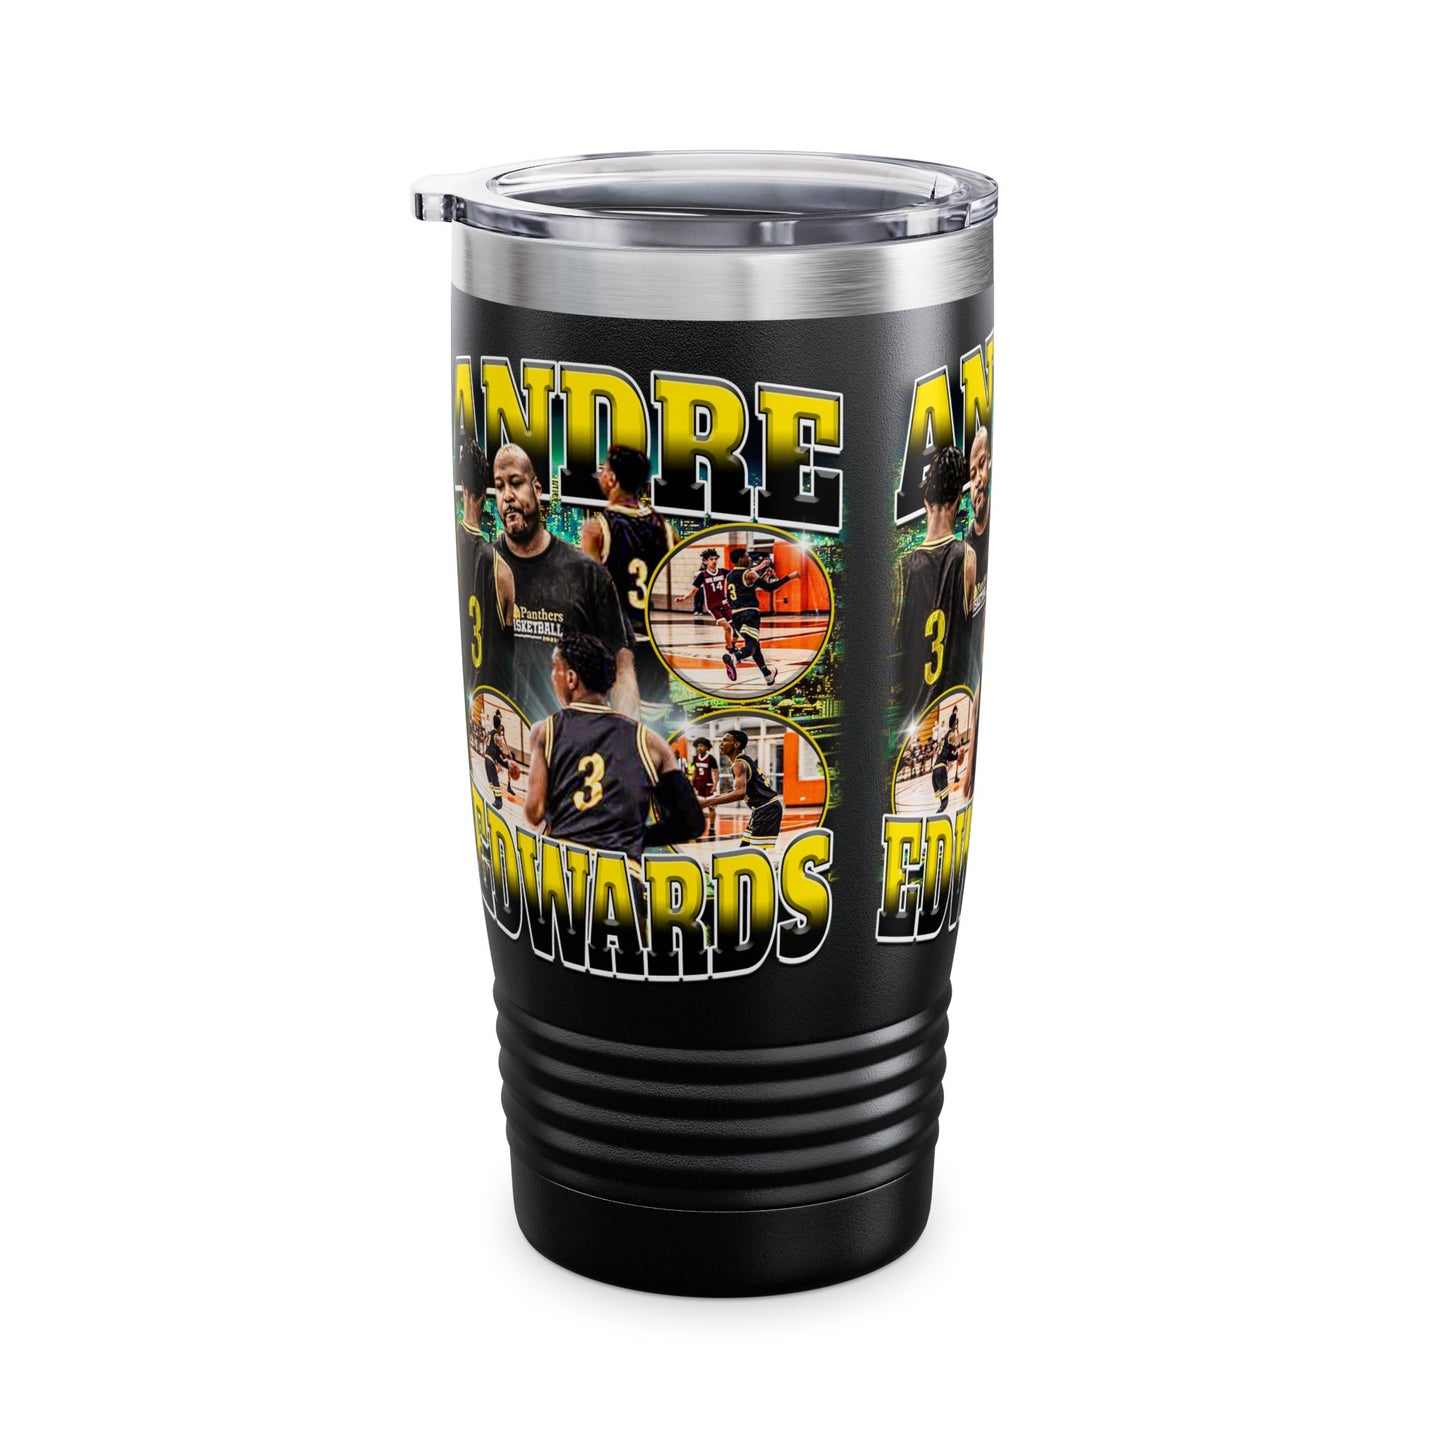 Andre Edwards Stainless Steal Tumbler